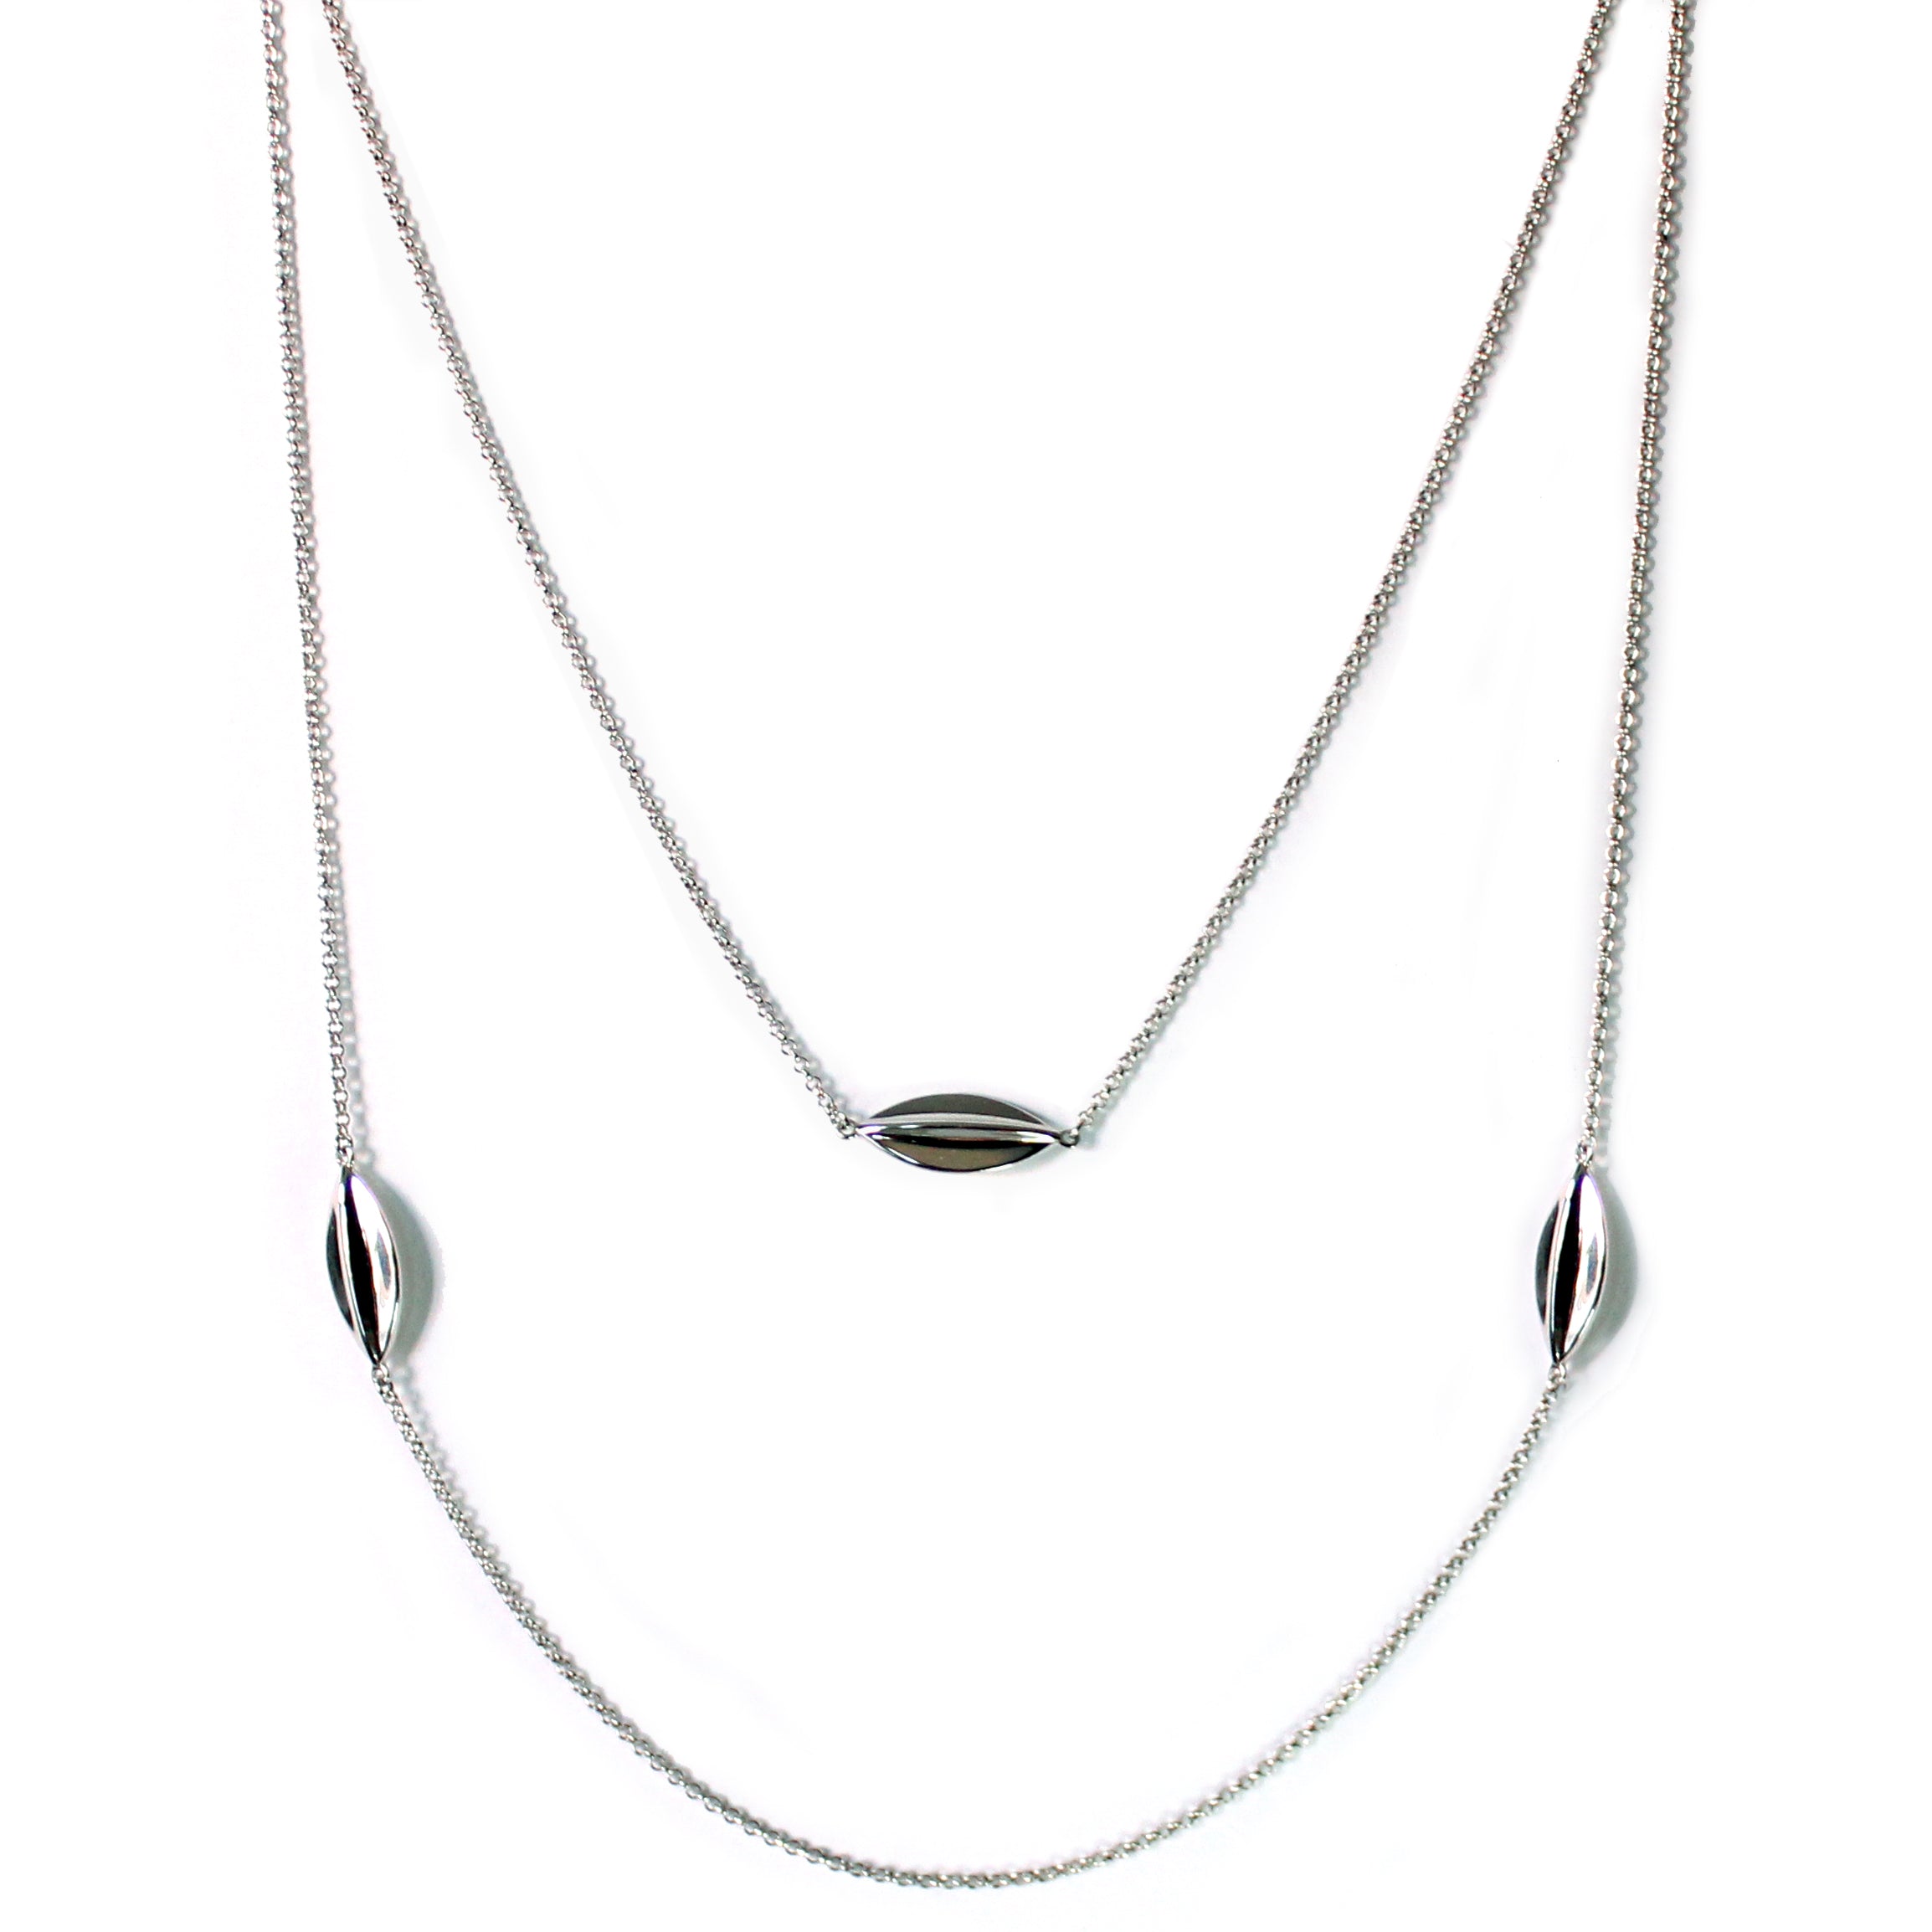 SPEAR -Dimensional Sterling Silver 48